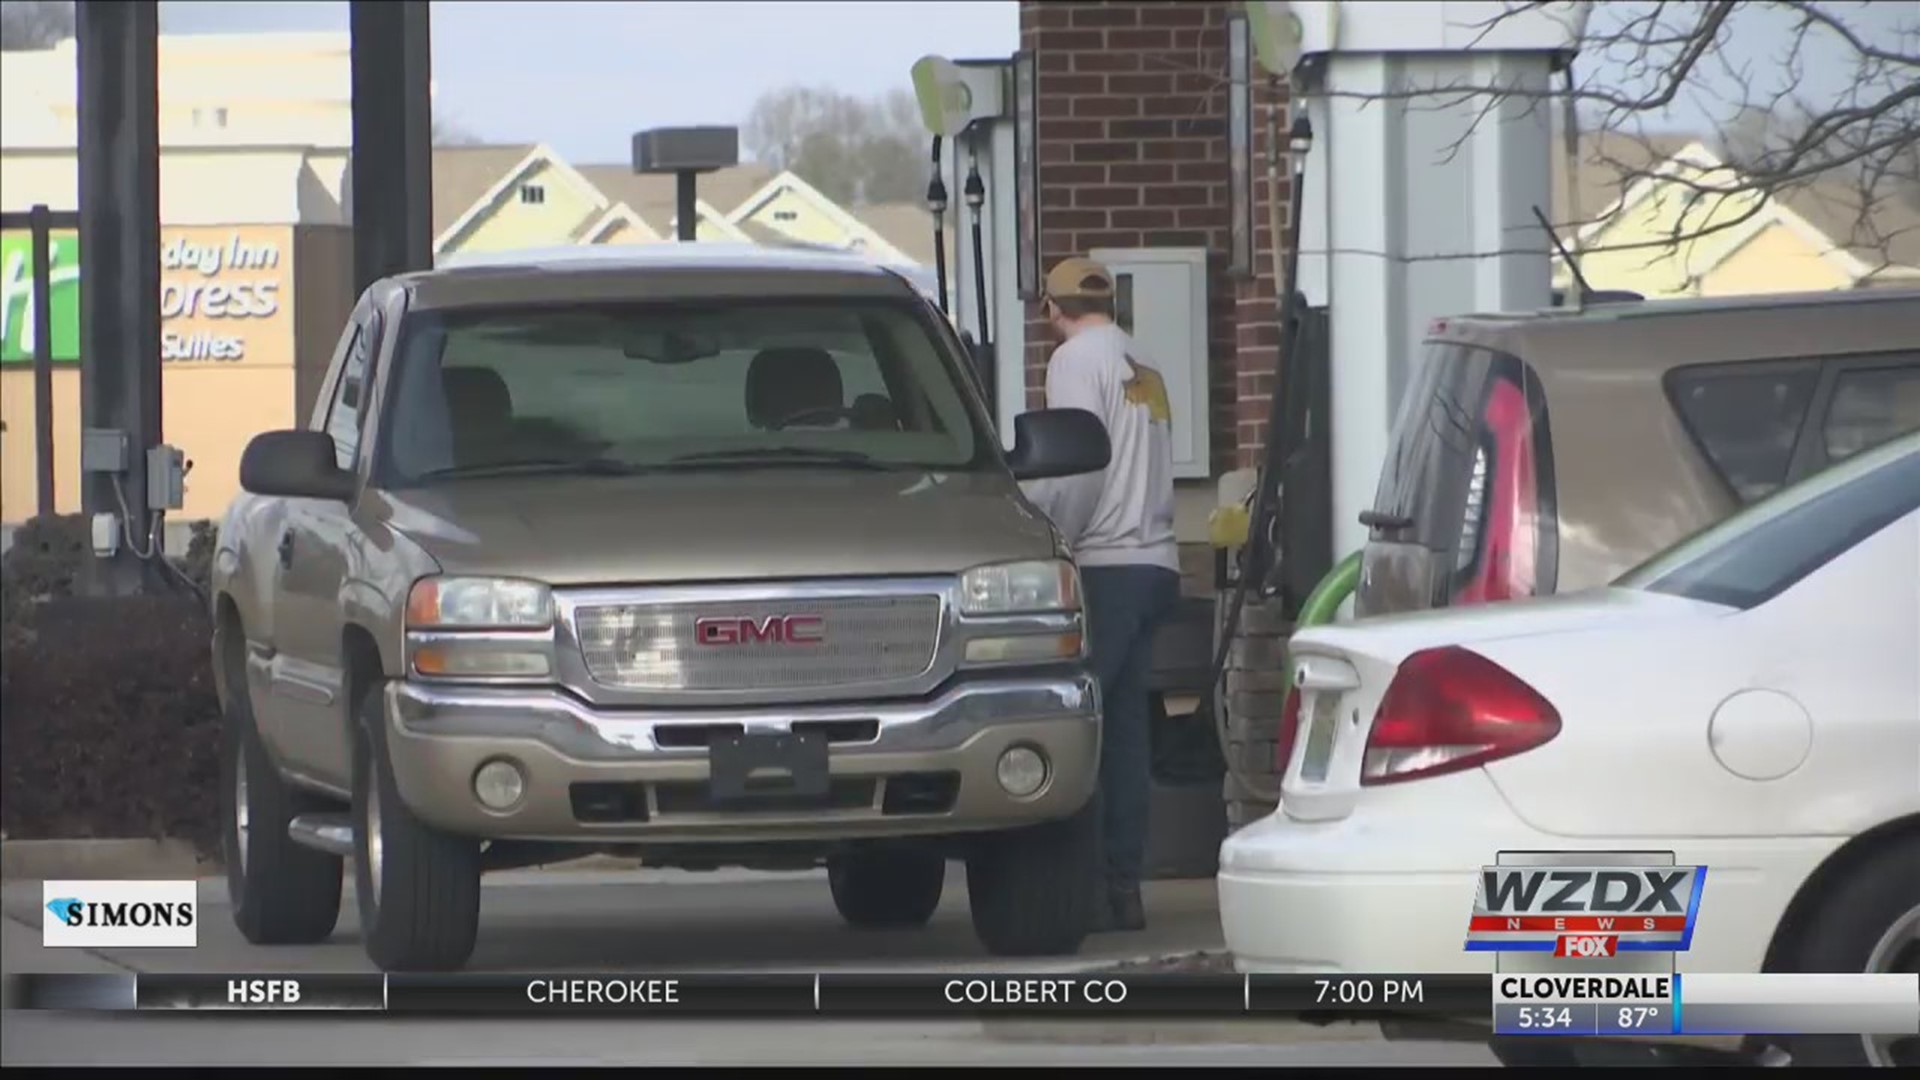 Alabama gas prices are going up Sunday as the new gas tax goes into effect.